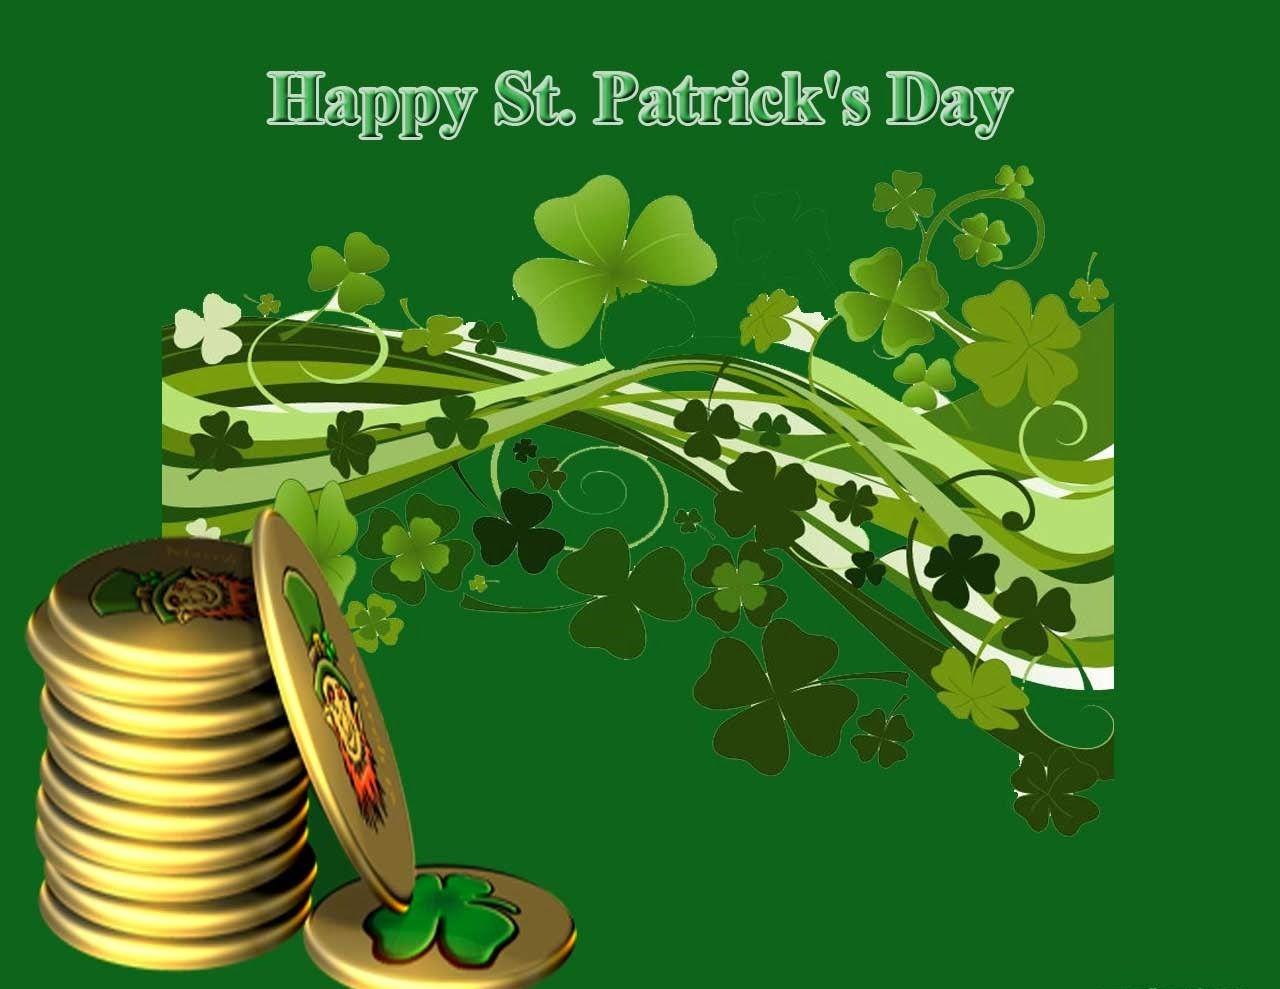 St Patrick's Day Wishes